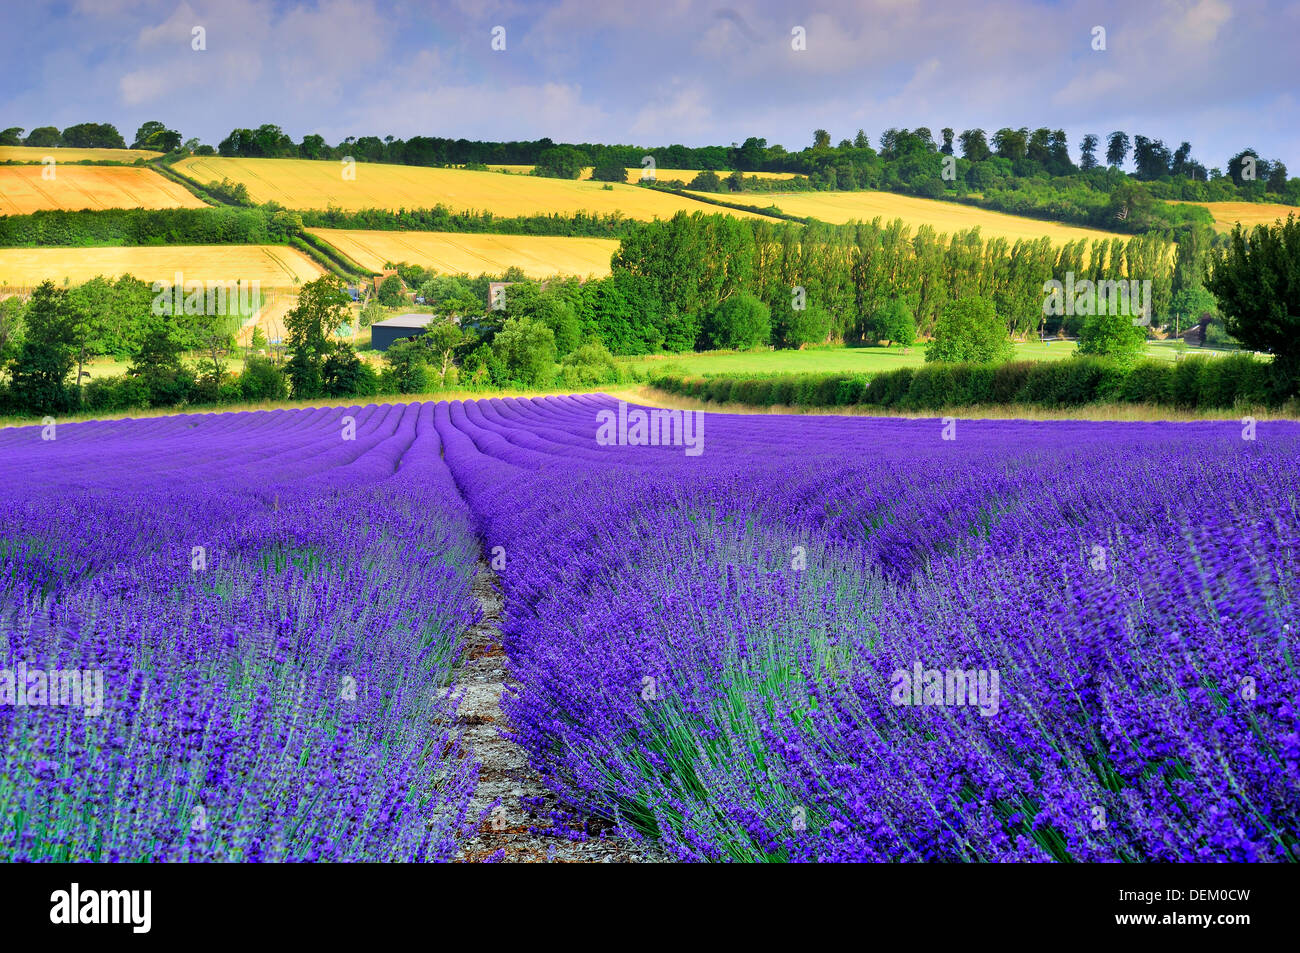 lavender field kent england uk flowers flora landscape beauty agriculture f crop ecologically friendly eco insect friendly Stock Photo